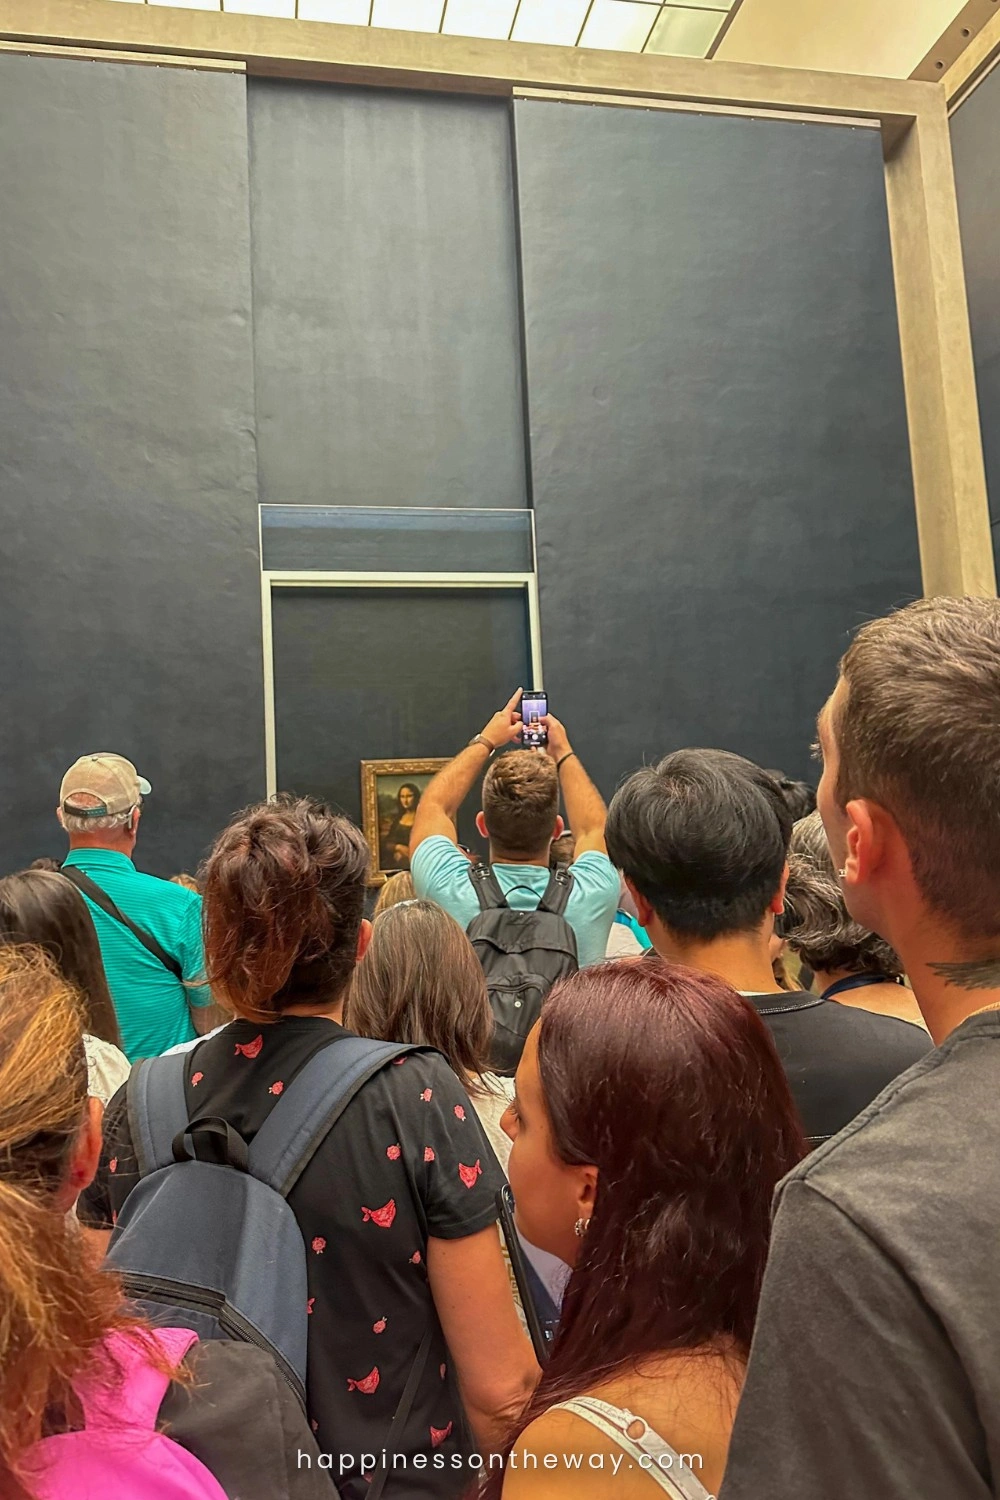 Is Paris overrated? A crowd of visitors with their attention fixed on the Mona Lisa, a man in the center raises his phone to capture a photo of the famous painting.